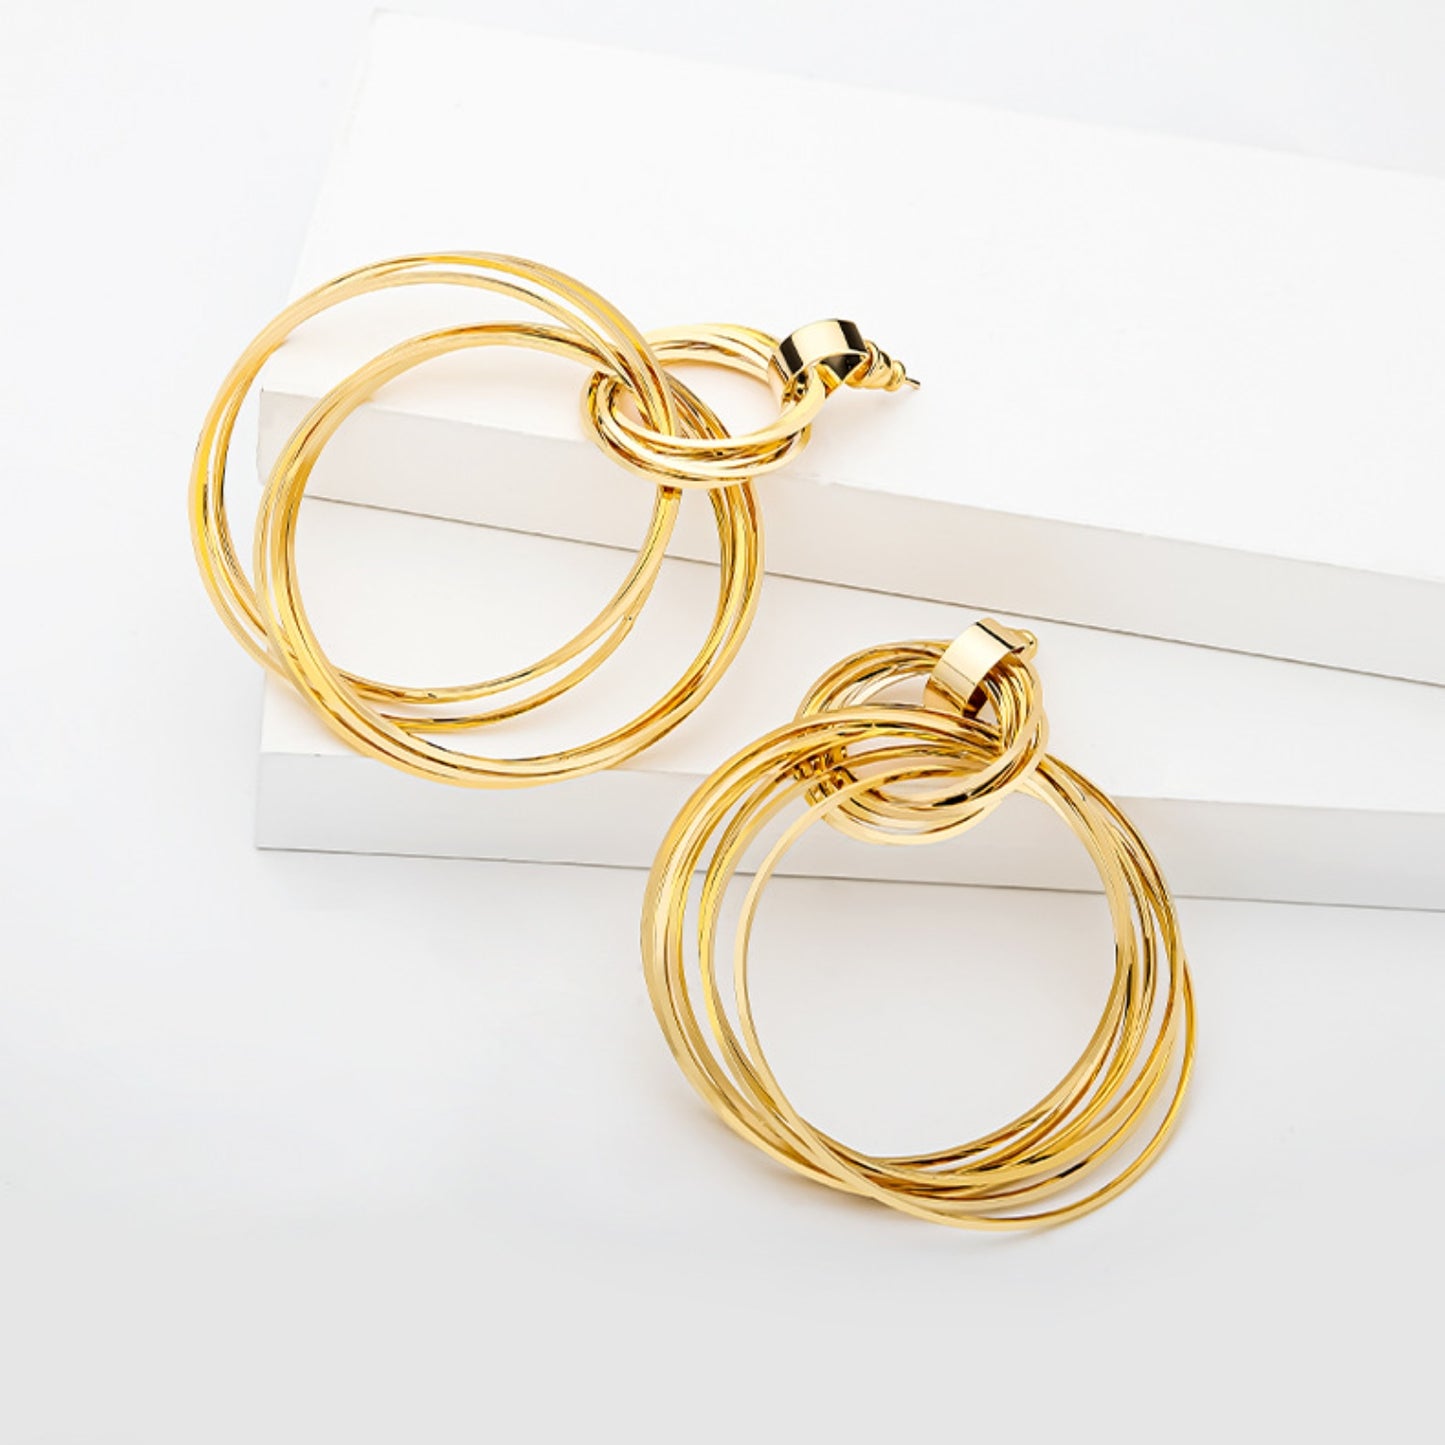 Chic Double-Hoop Earrings in Gold-Plated Copper